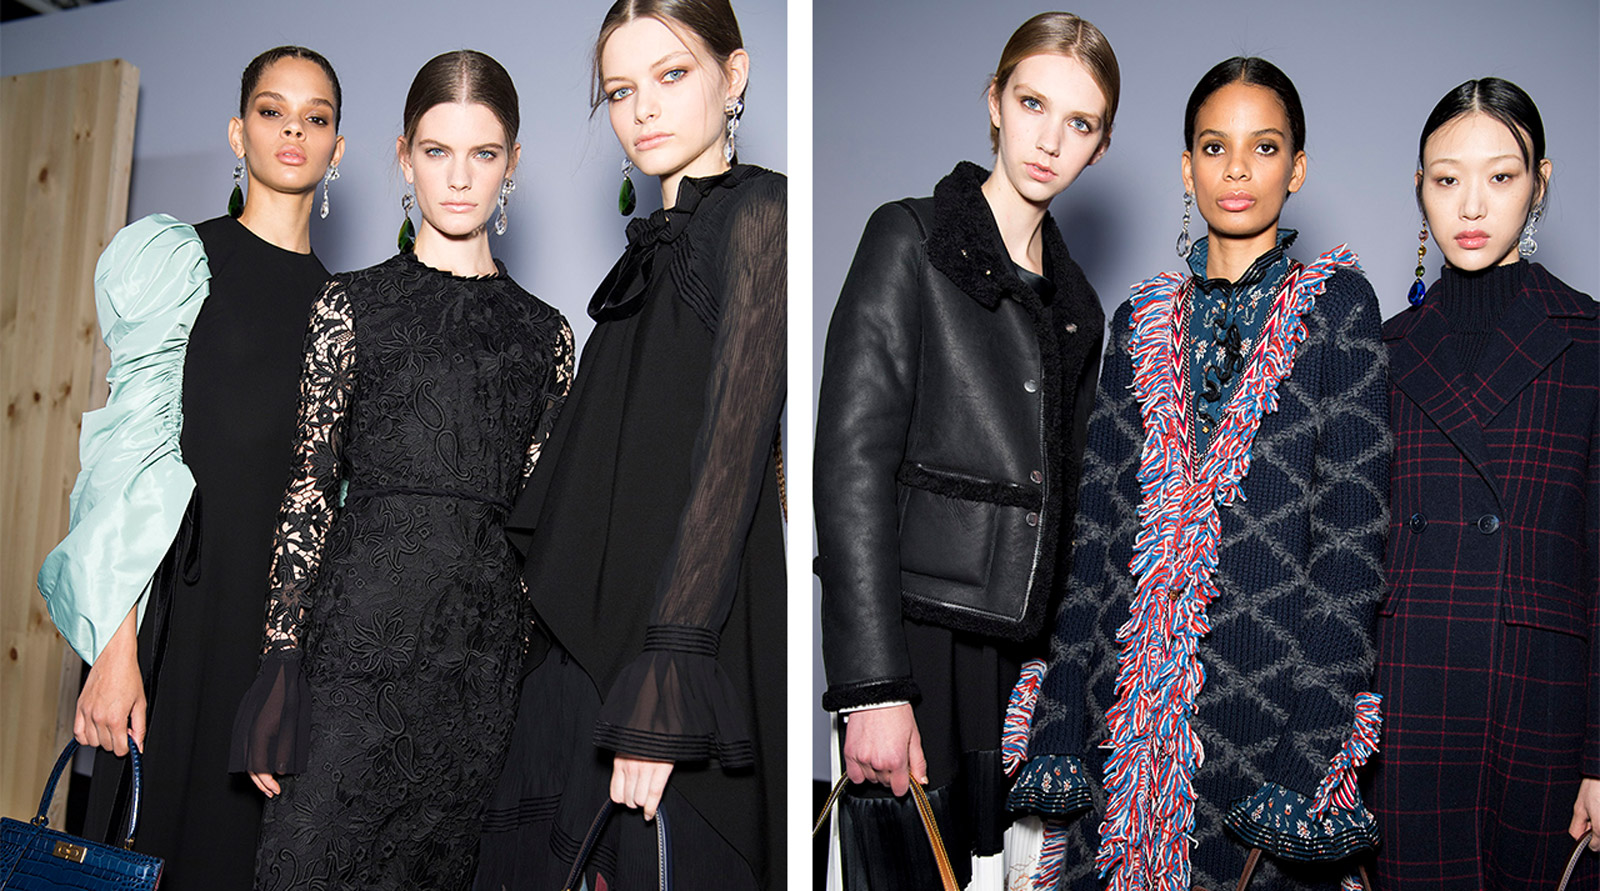 Tory Burch deconstructs classic style in new NYFW collection